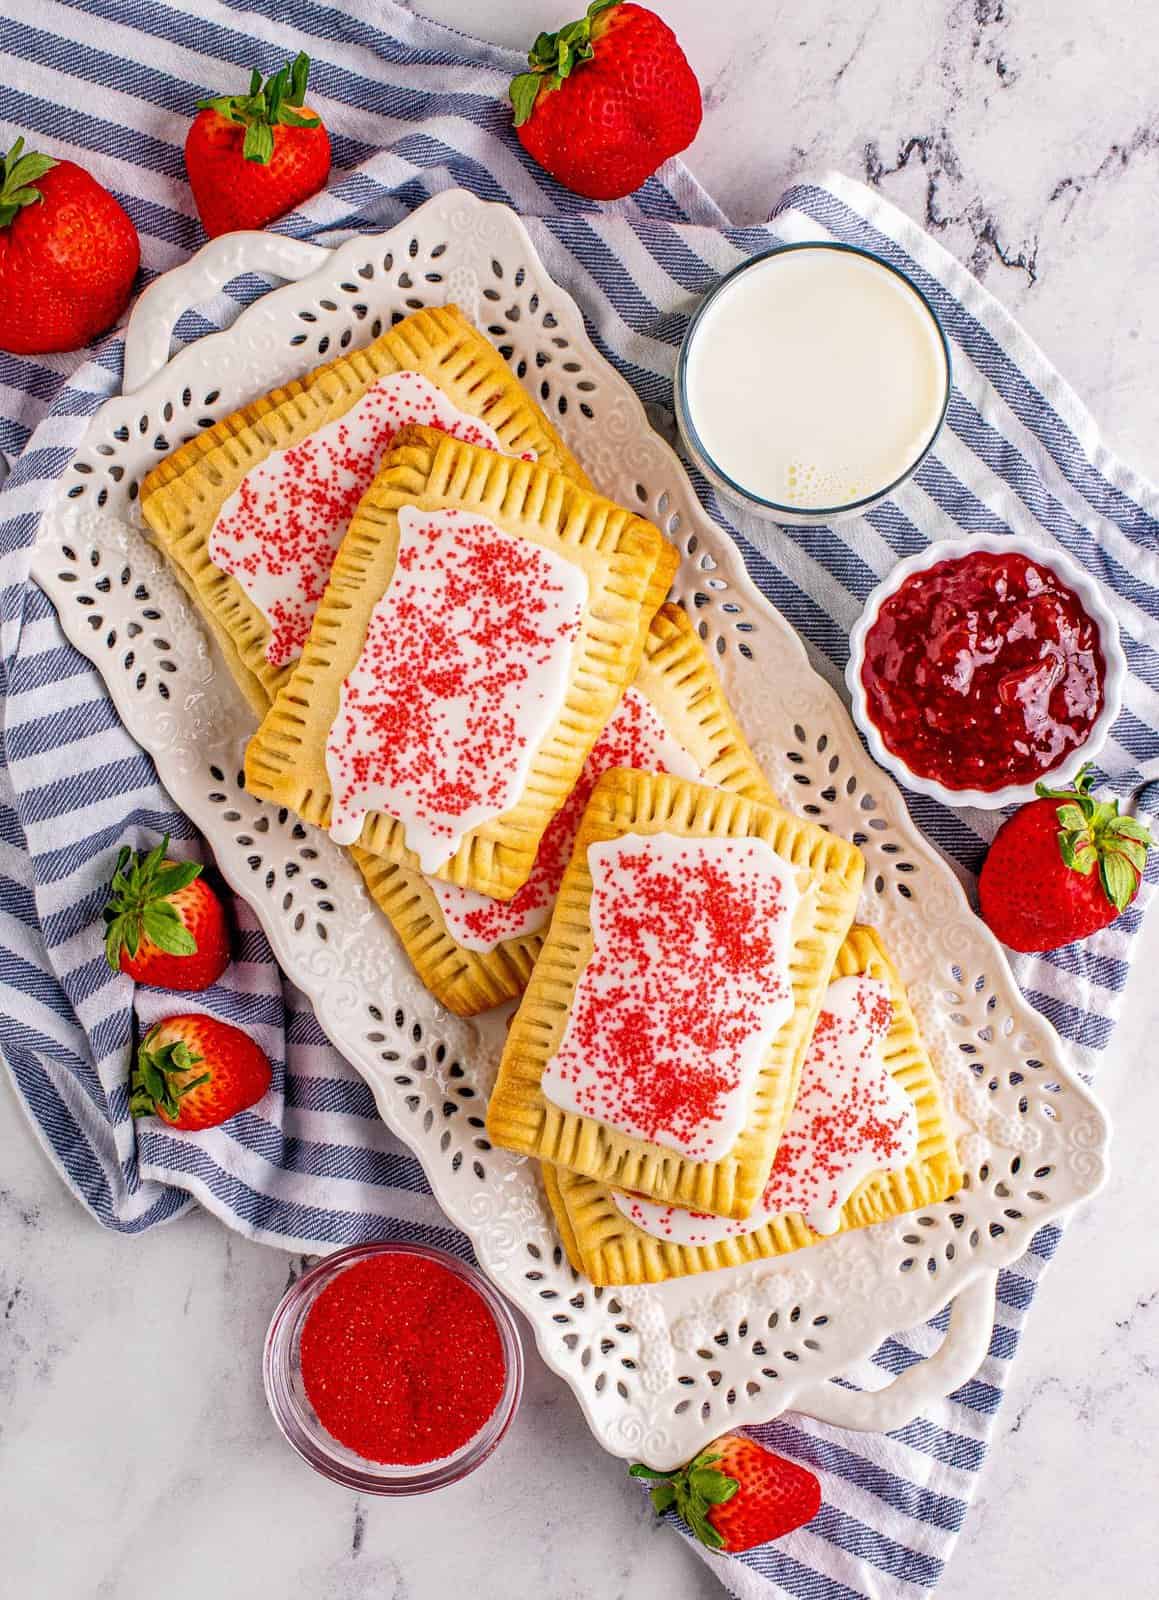 Overhead of Homemade Strawberry Pop-Tarts glazed and sprinkled with sanding sugar.